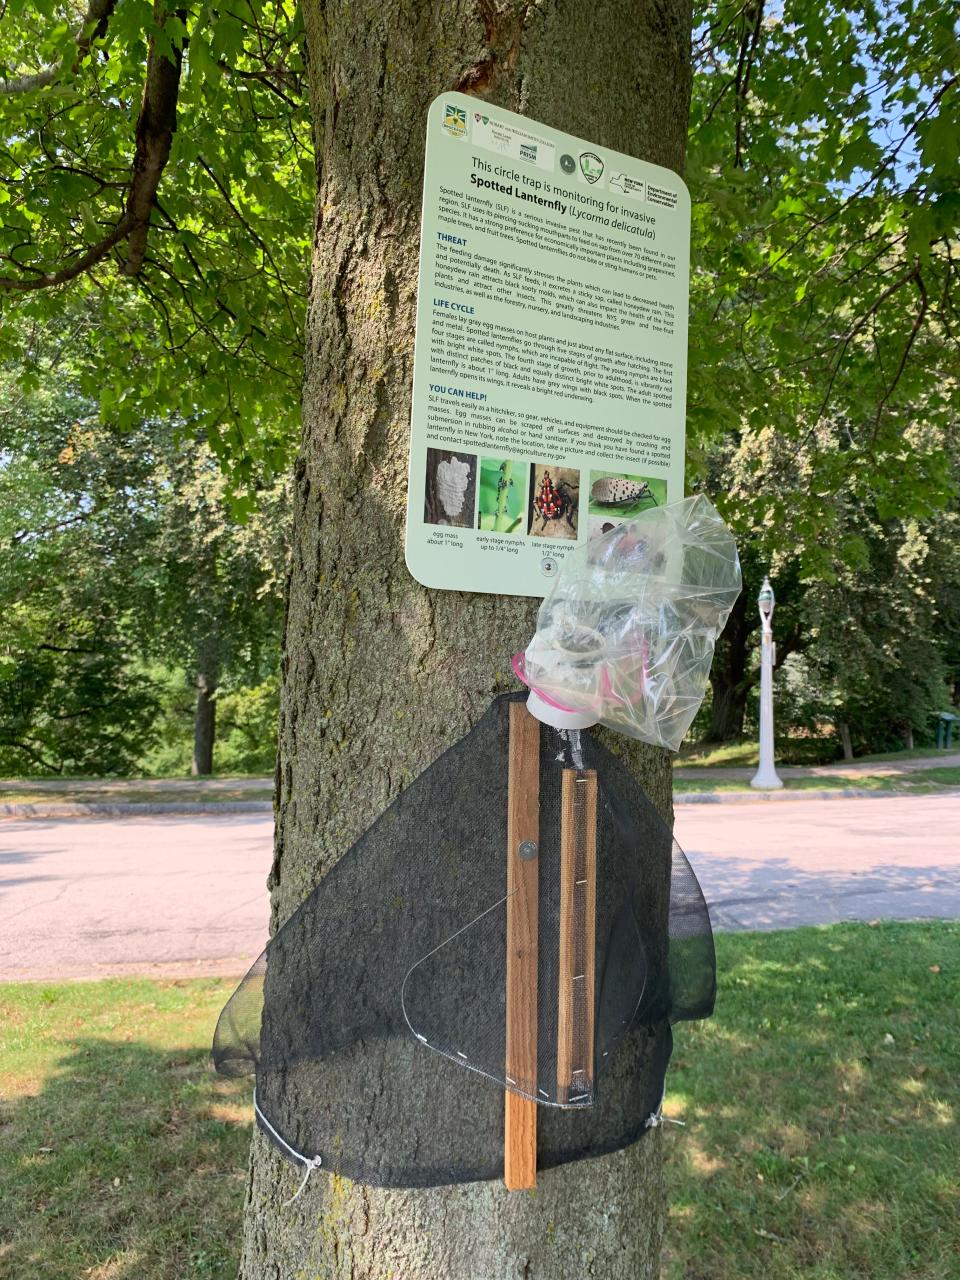 A circle trap is seen on a tree in Highland Park, monitoring for spotted lanternflies in this Aug. 29, 2021 file photo.